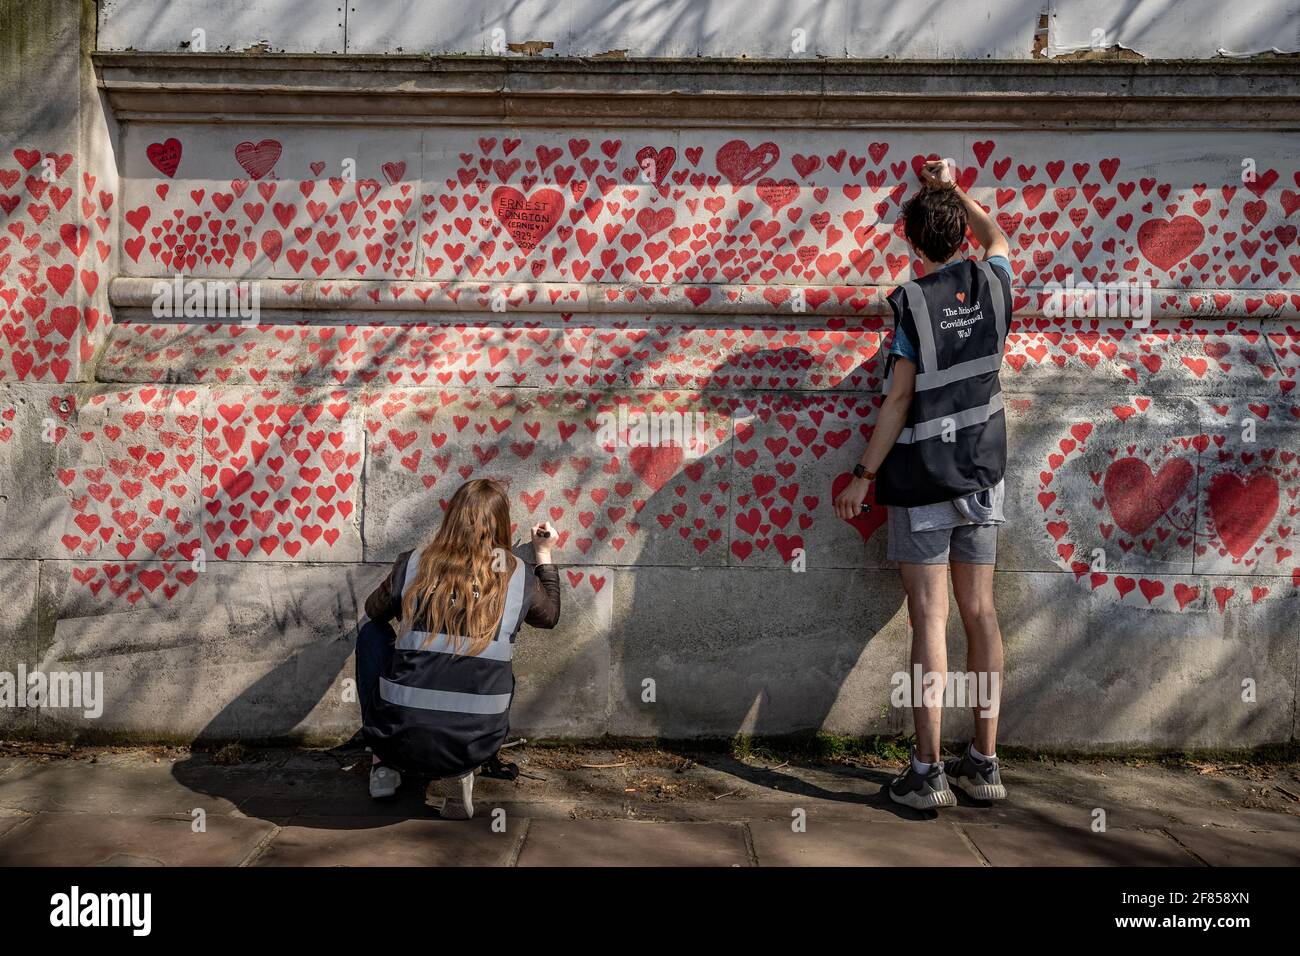 Coronavirus: National Covid Memorial Wall of Hearts, Westminster, Londres, Royaume-Uni. Banque D'Images